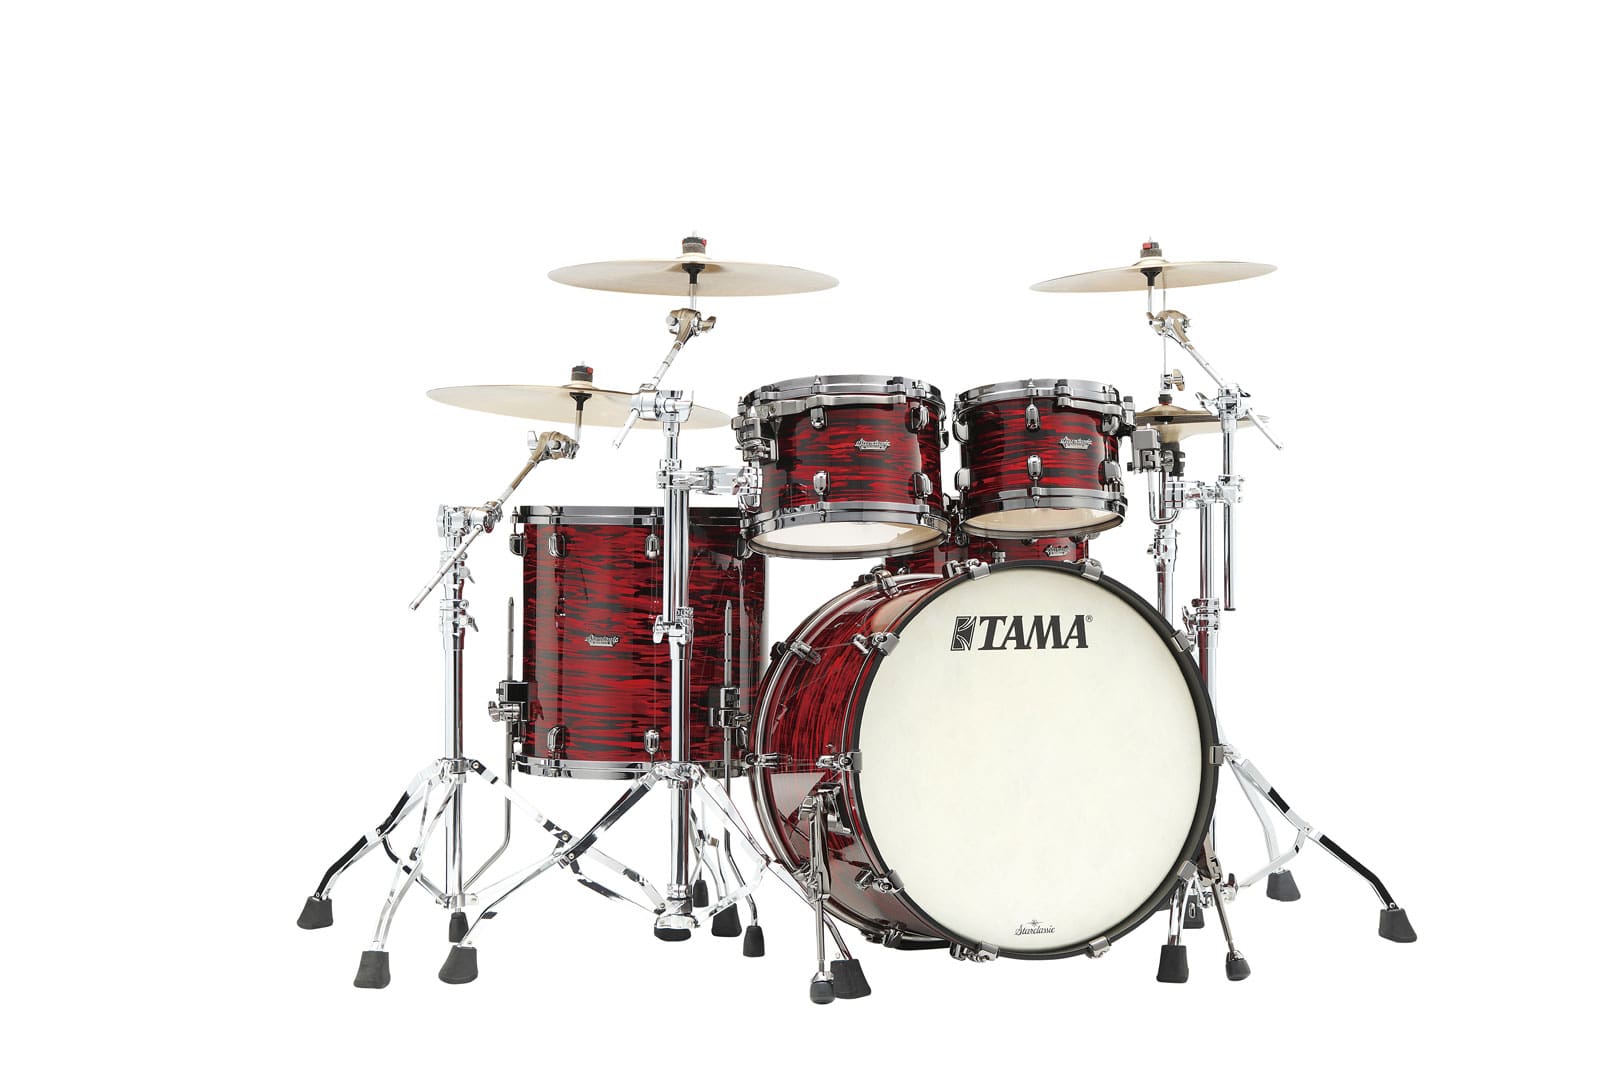 TAMA STARCLASSIC MAPLE STAGE 22 DRUM KIT, BLACK NICKEL SHELL HARDWARE RED OYSTER